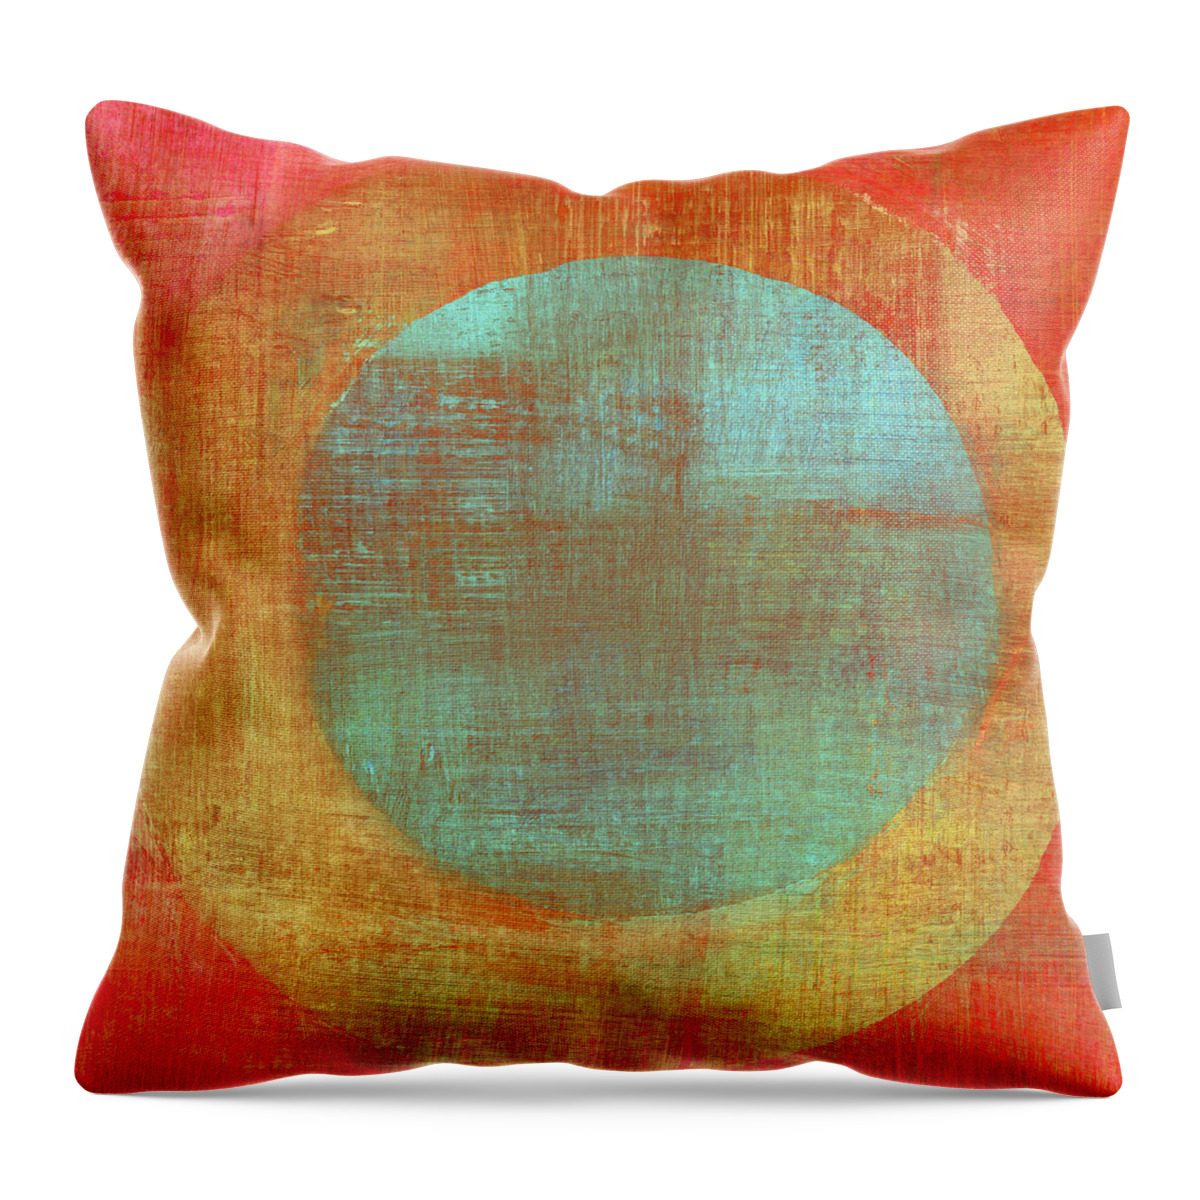 Art Throw Pillow featuring the photograph Painted Composition With Concentric by Qweek